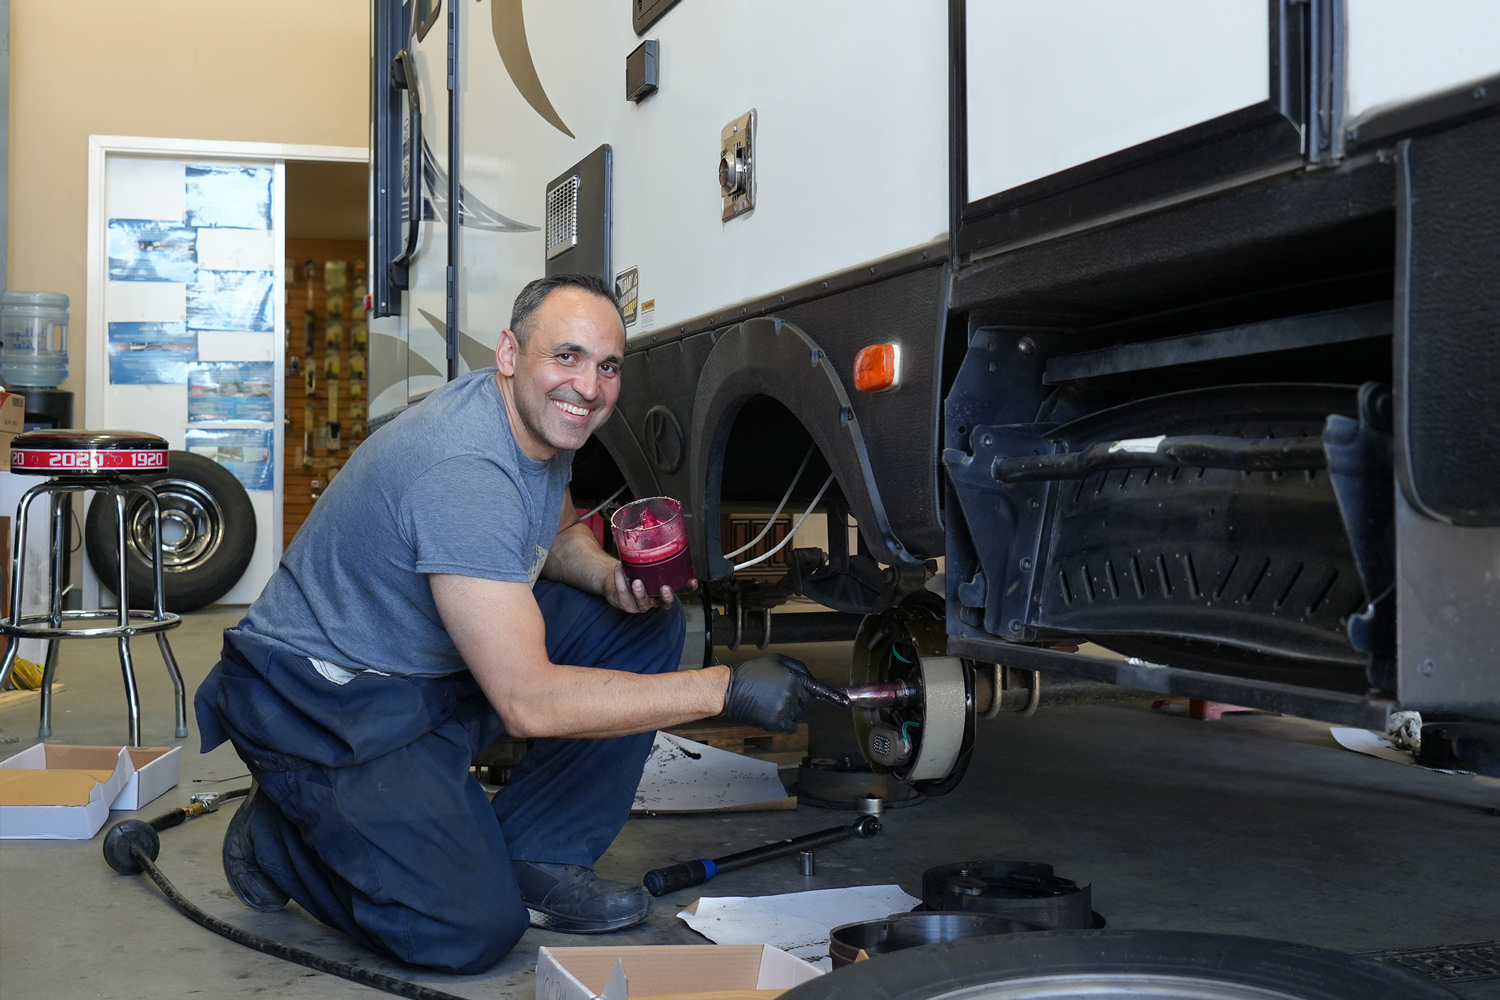 RV service technician working on a vehicle